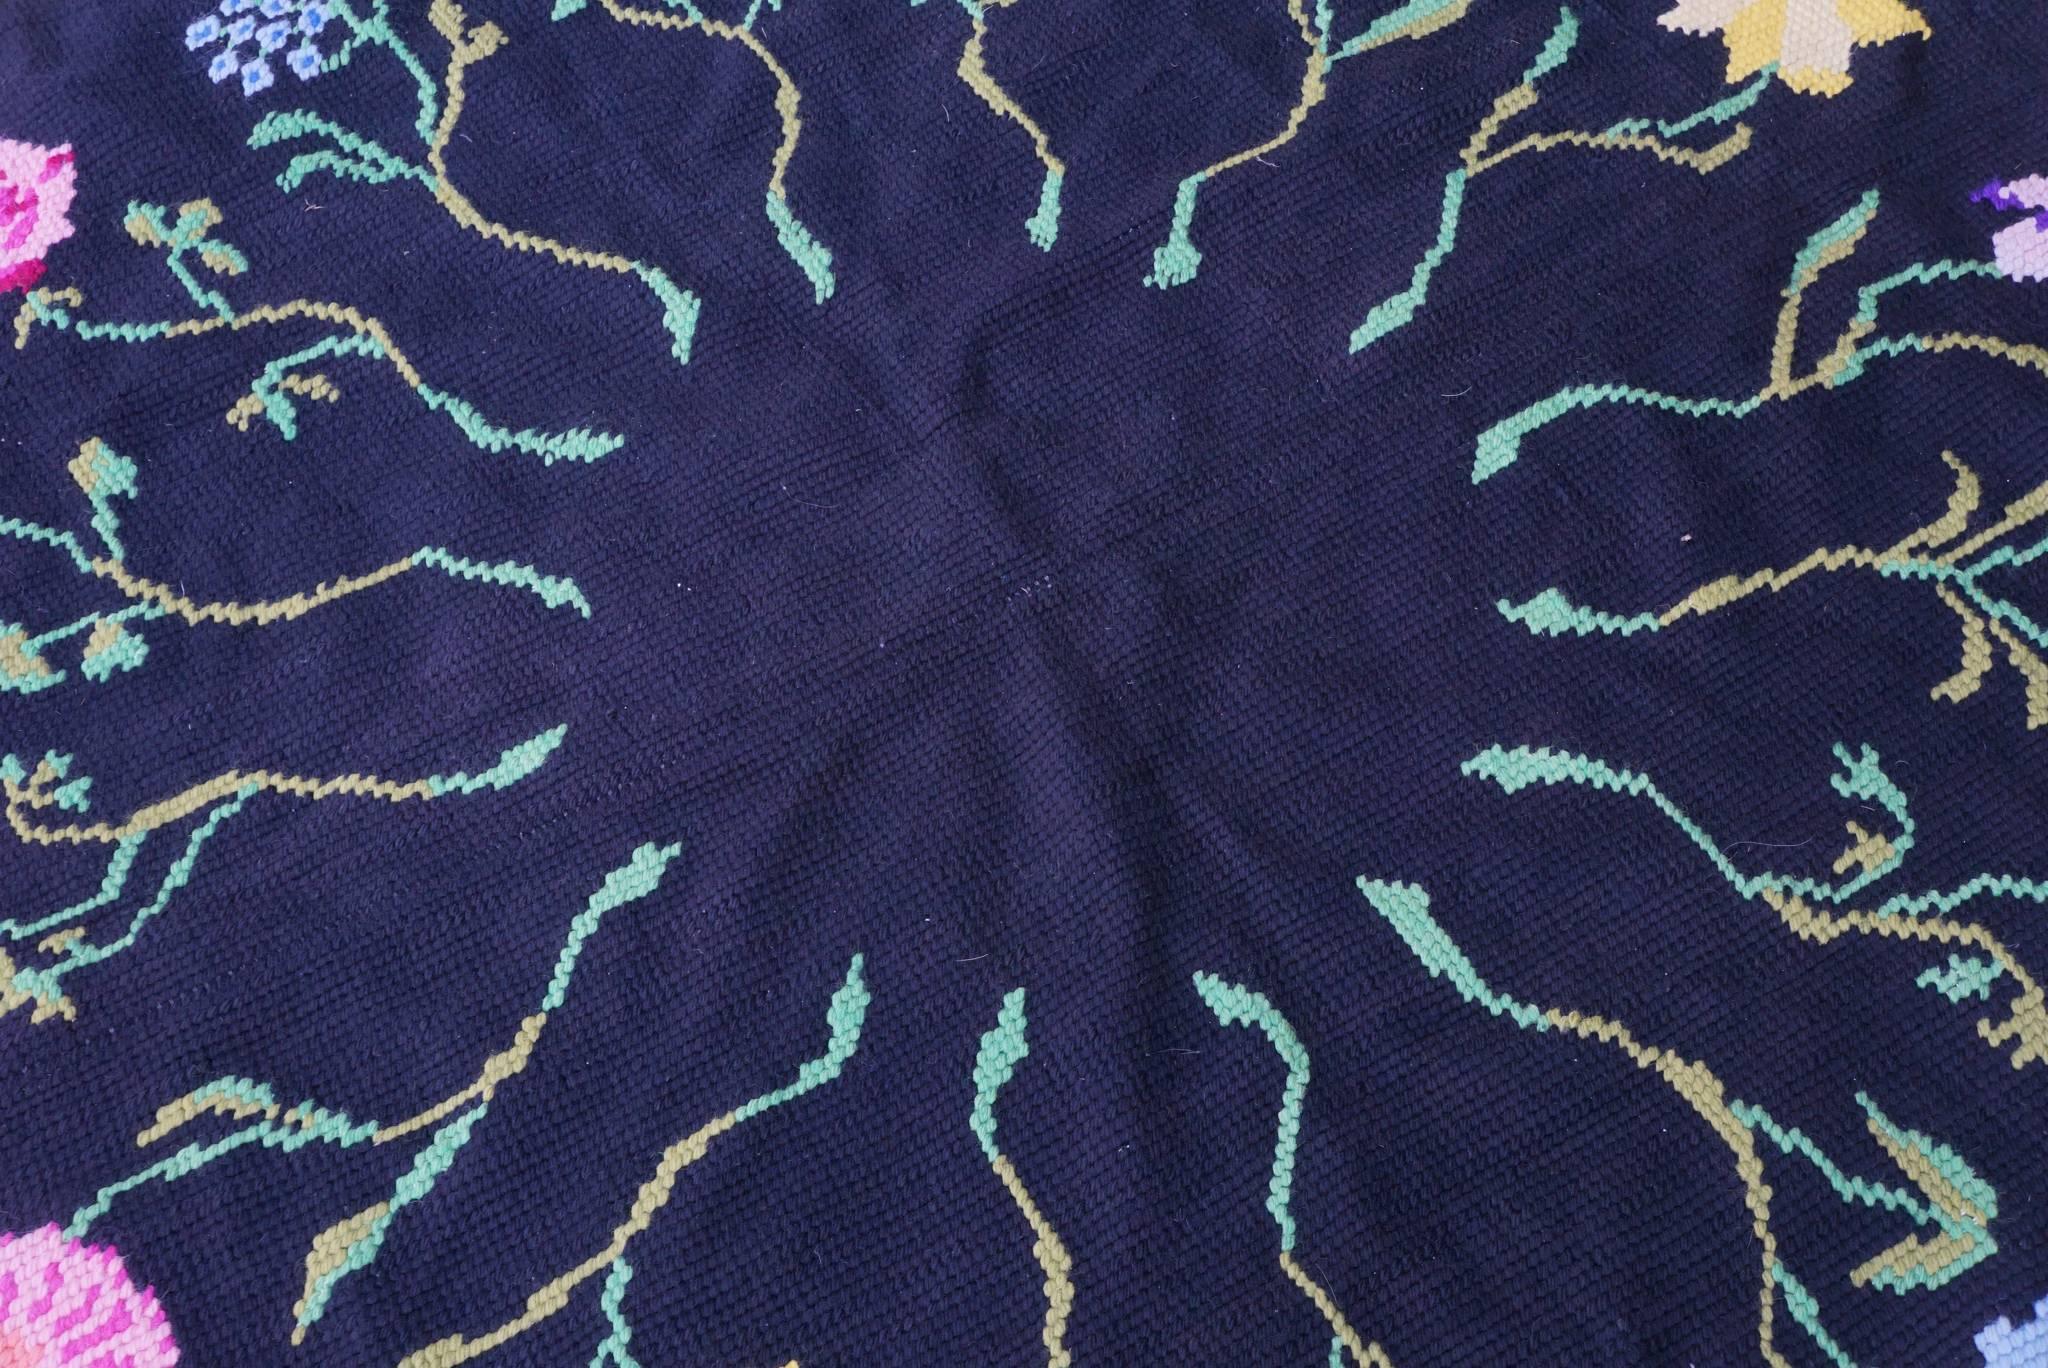 20th Century Vintage Hooked Yarn Rug from the Estate of Bunny Mellon